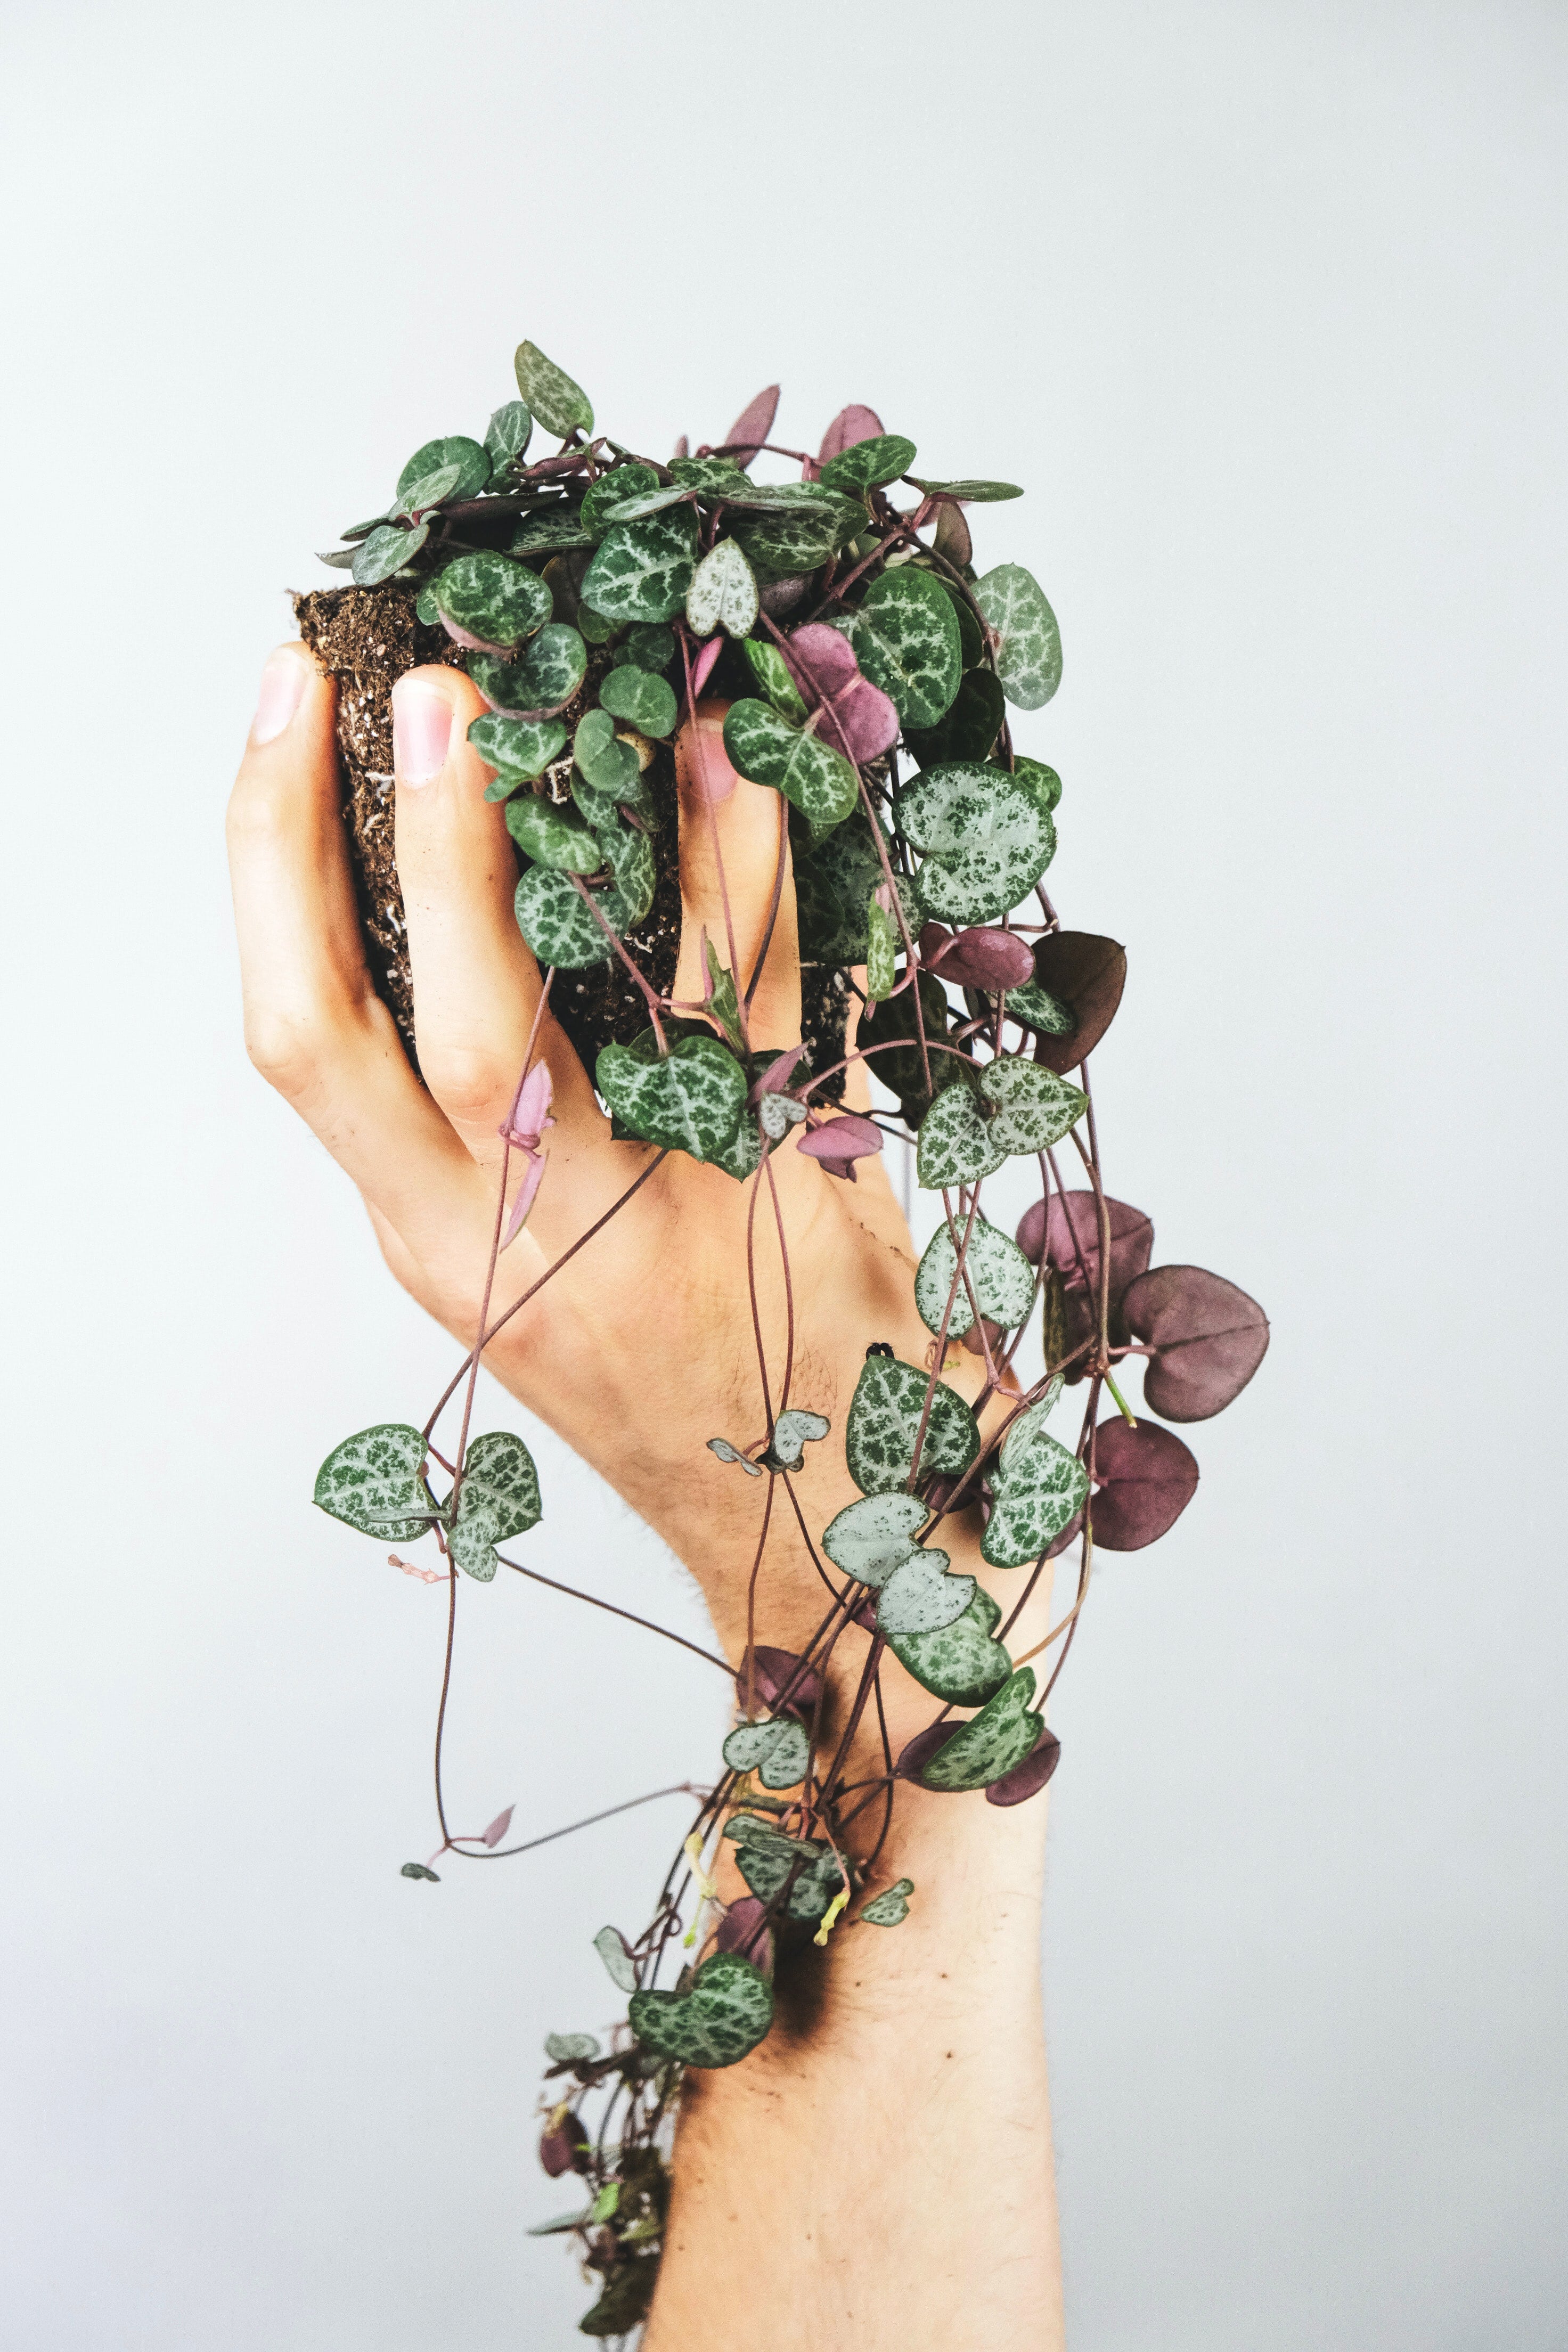 A hand holding up a ceropegia woodii, also known as string of hearts plant.